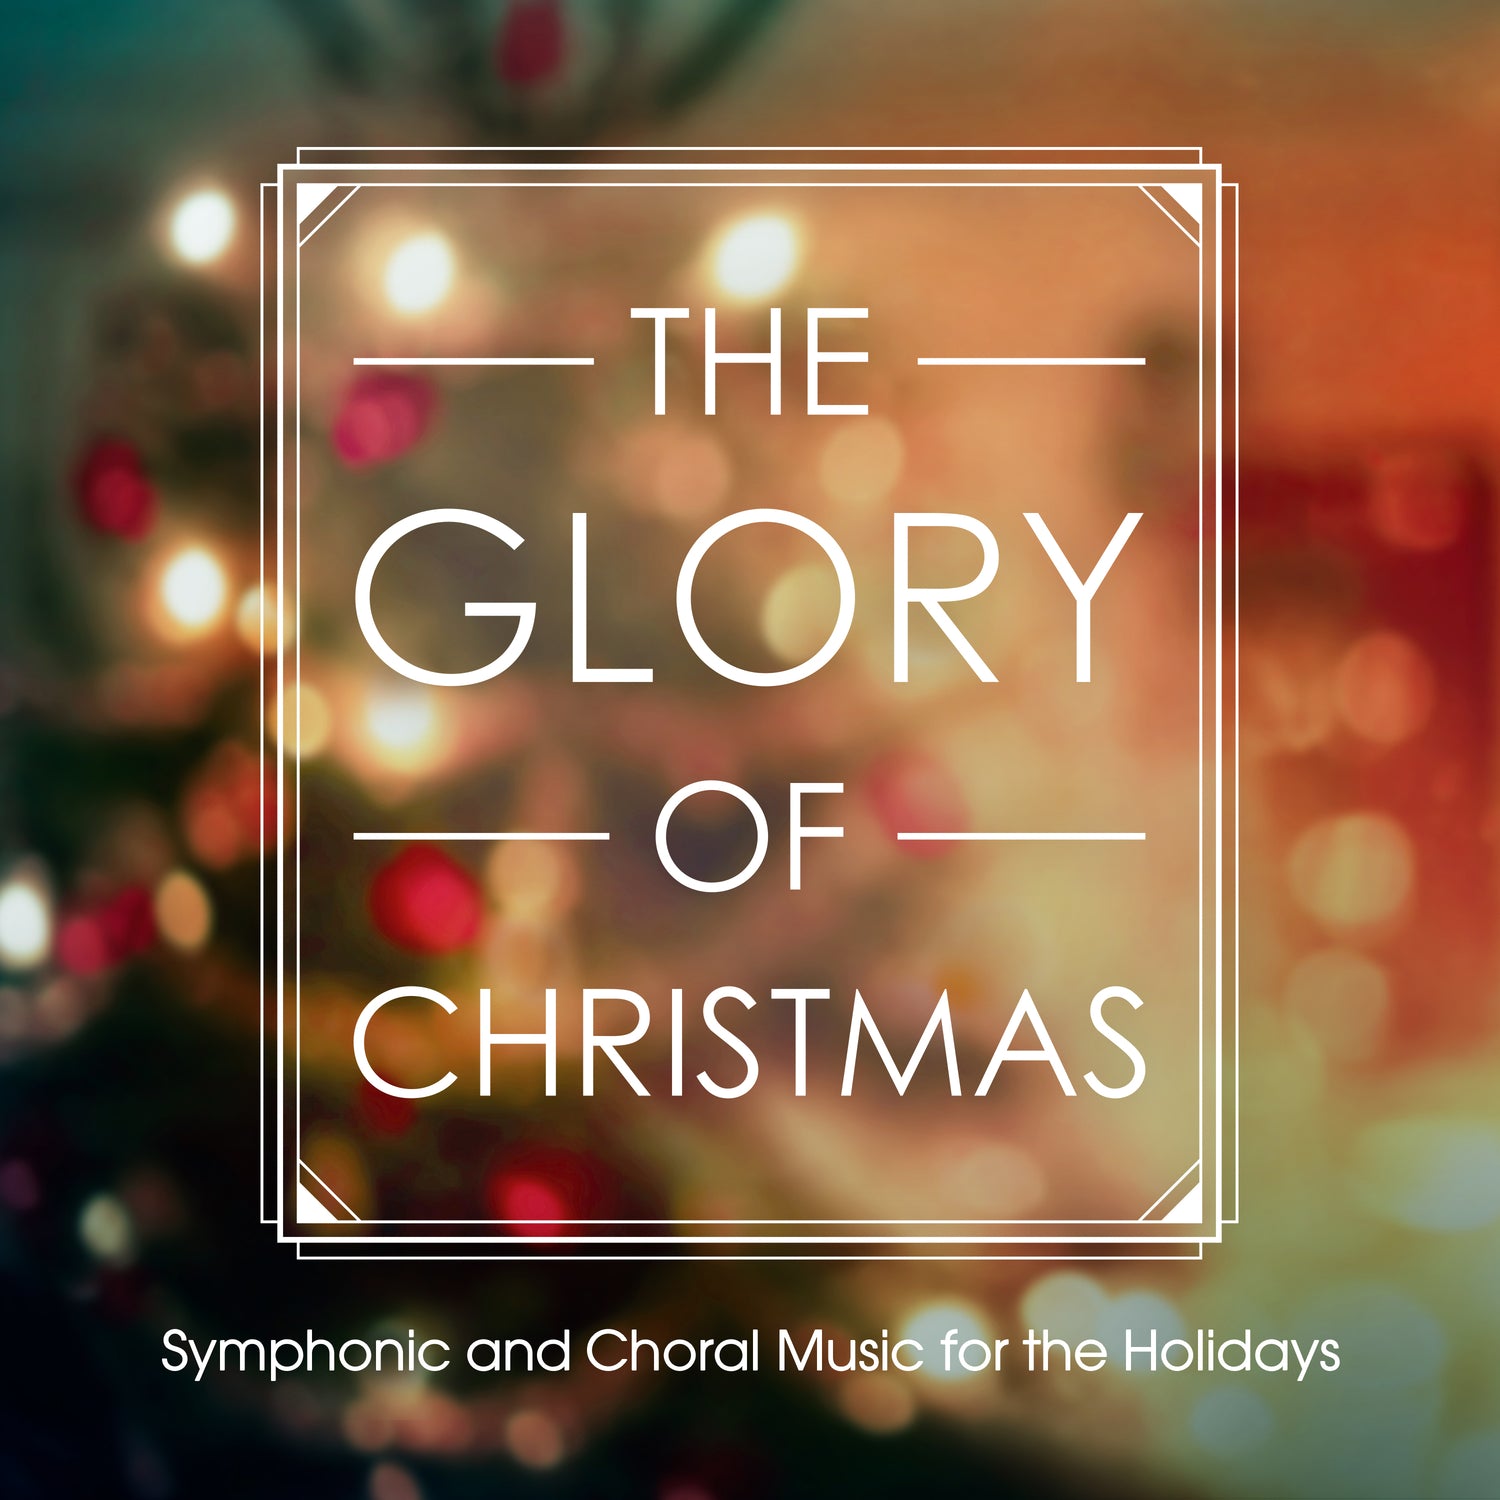 The Glory of Christmas: Symphonic & Choral Music for the Holidays